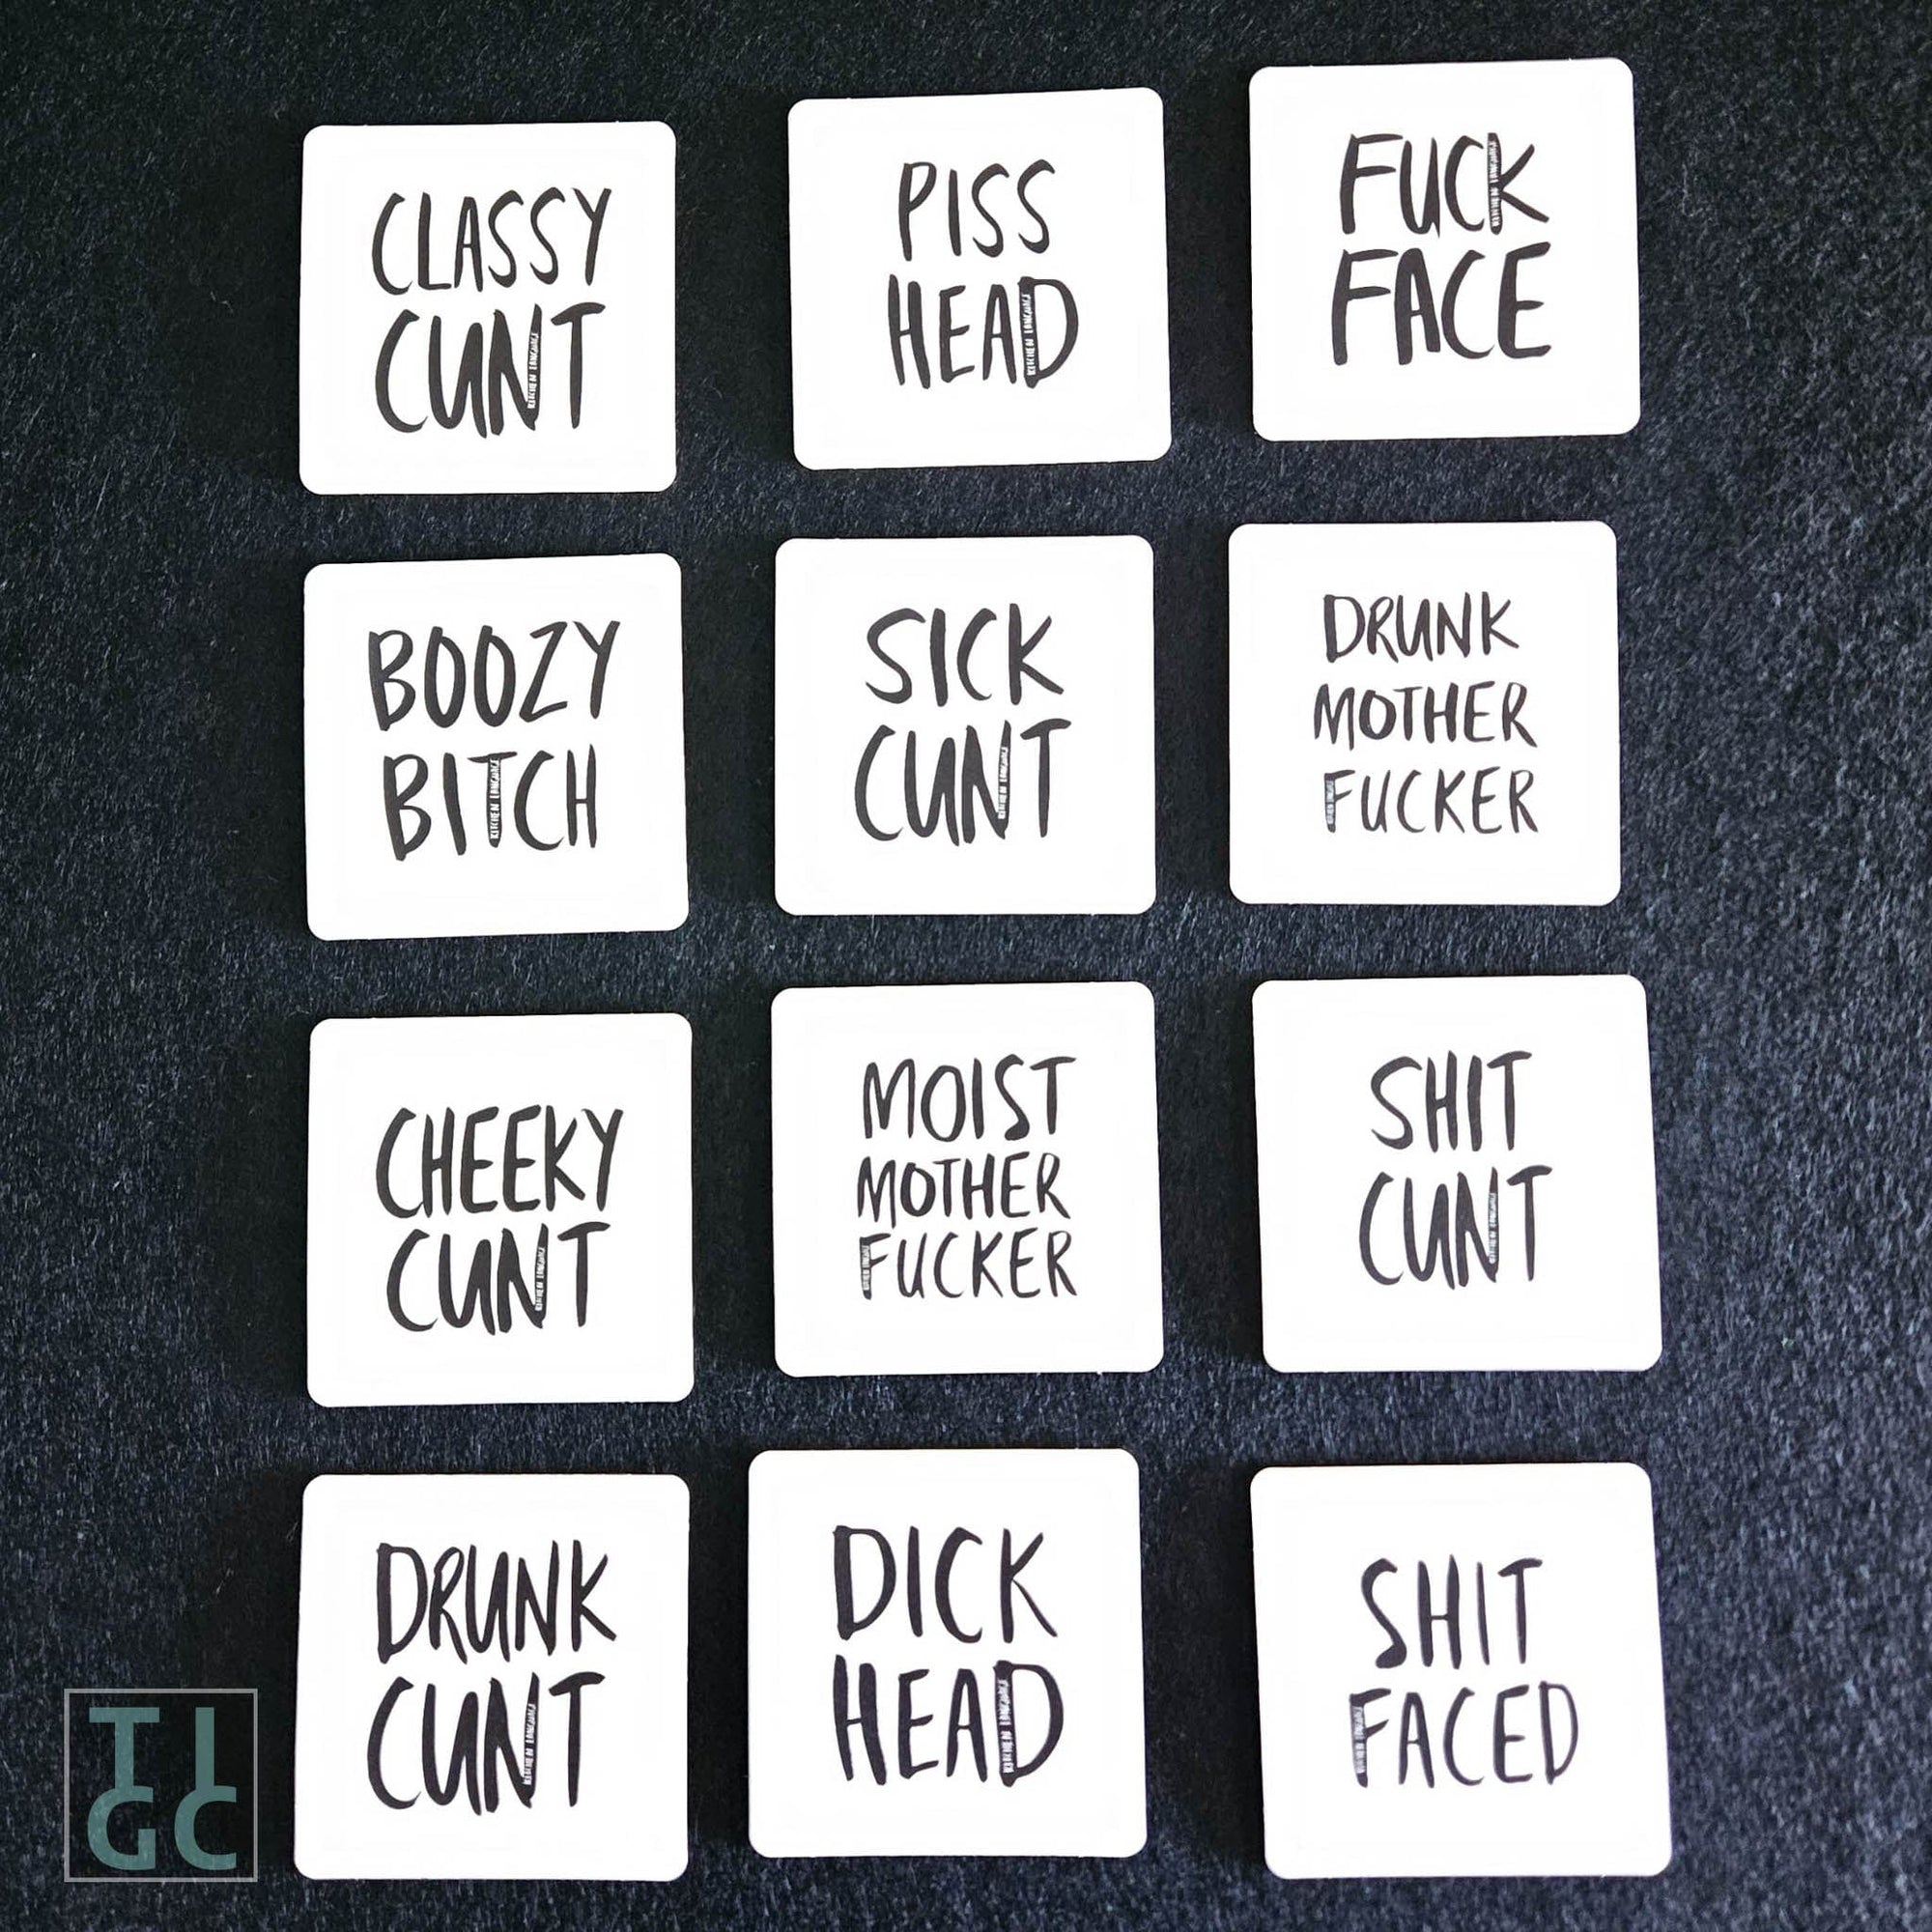 Inappropriate coasters / beer mats.